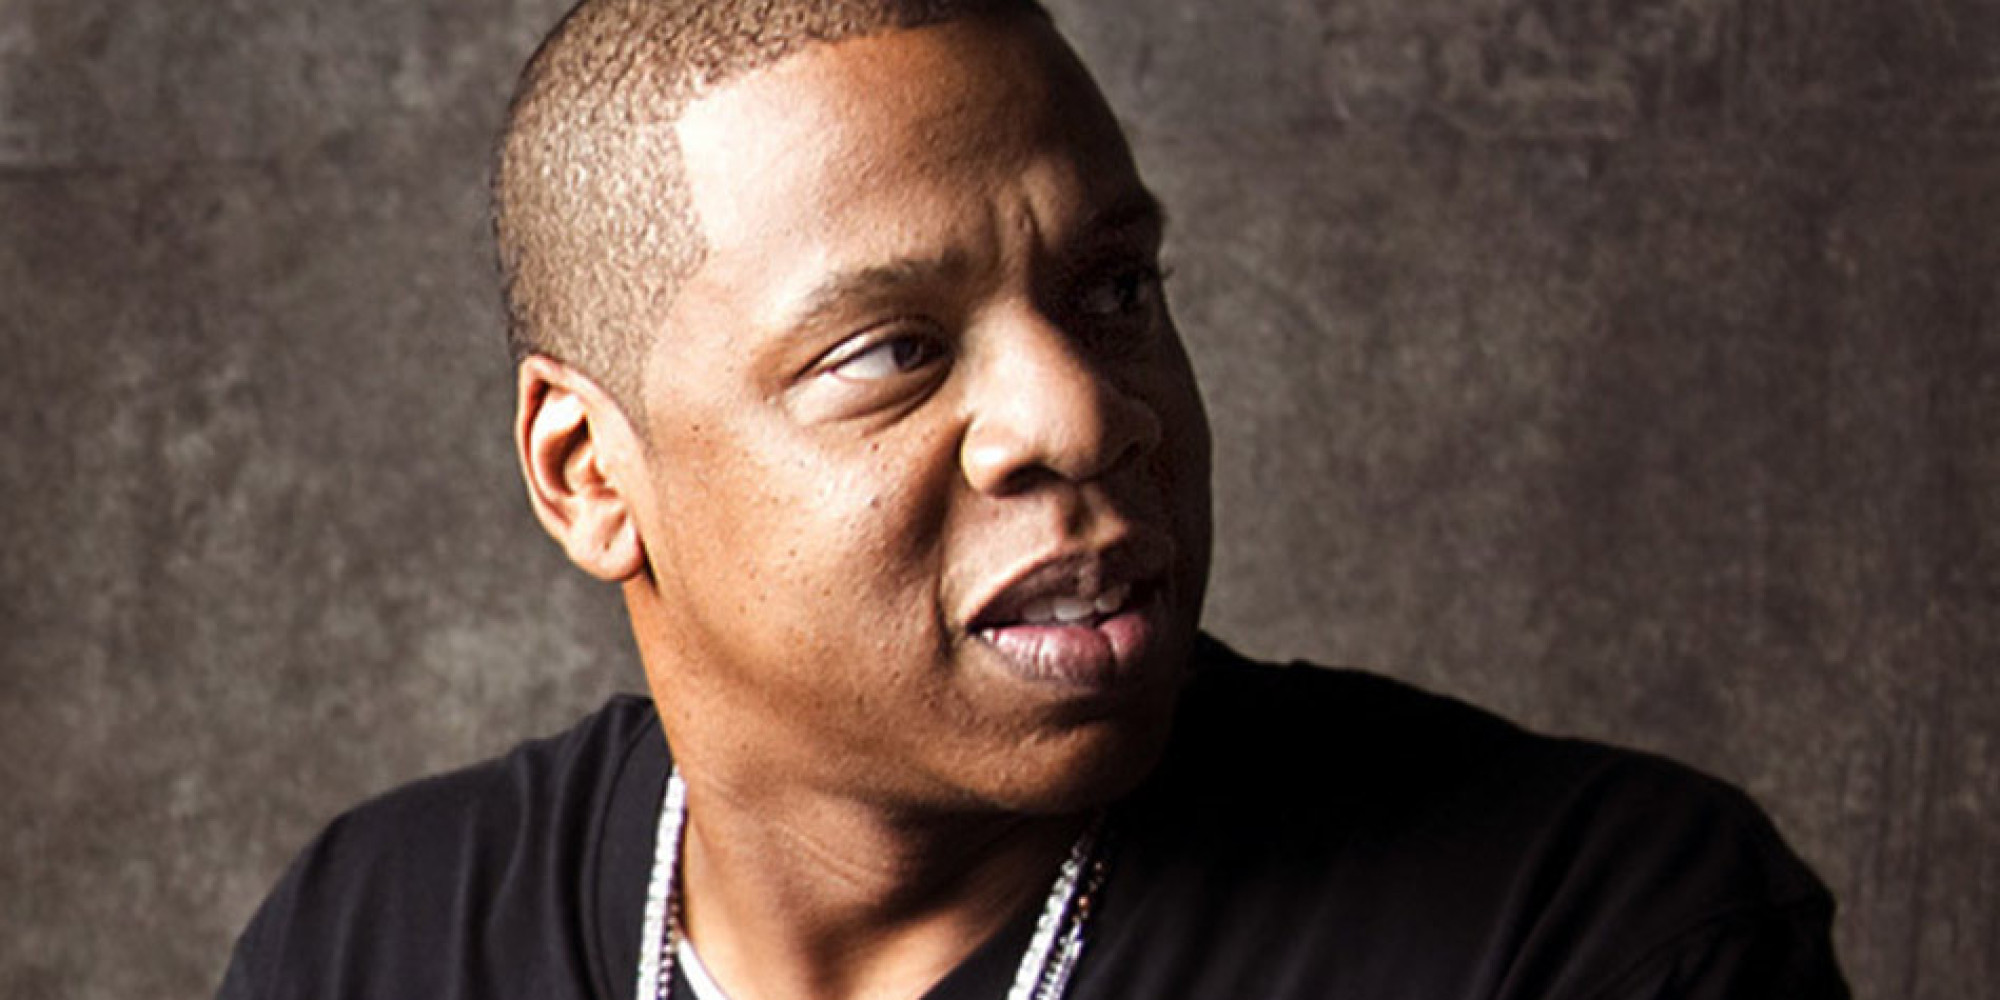 Square finalises majority acquisition of Tidal streaming service from Jay-Z